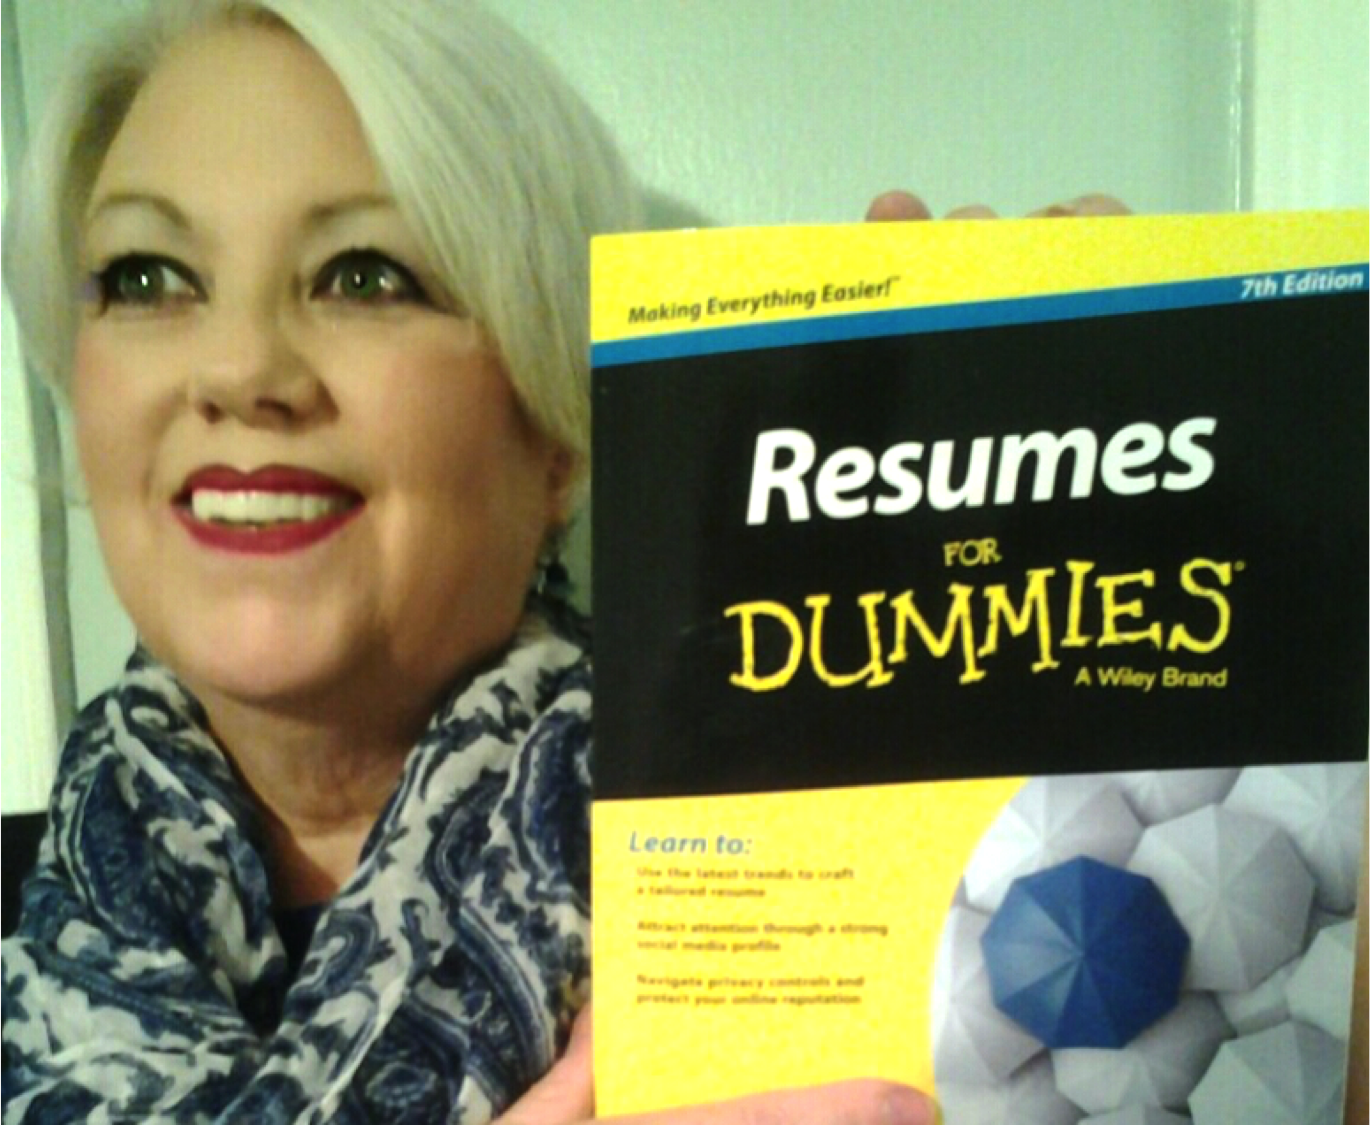 Posey Salem, nationally published resume writer, holding copy of the new 7th Edition of Resumes for Dummies book.